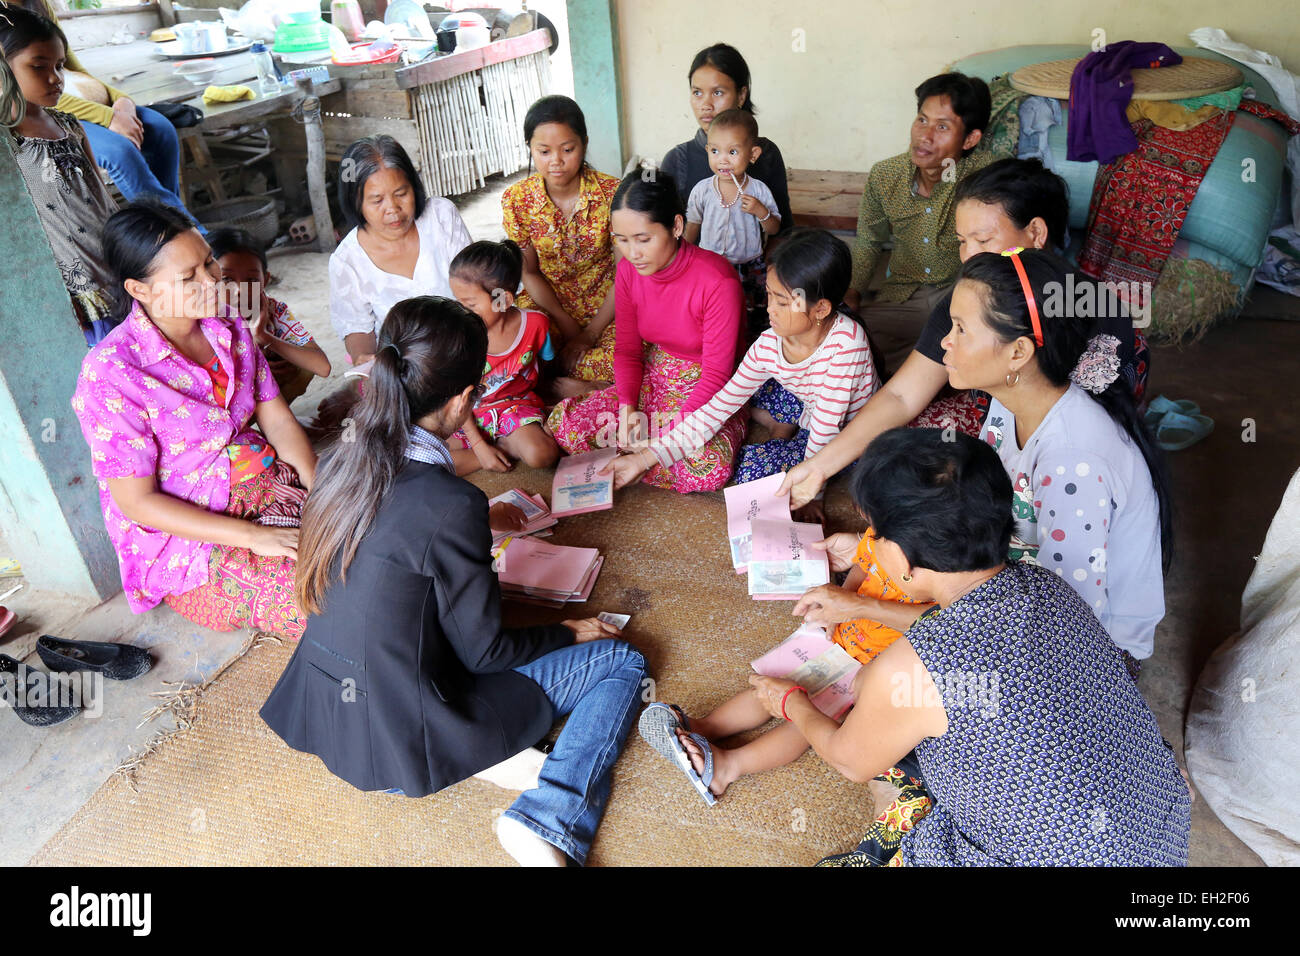 Women participate in a Village Savings and Loan meeting in a village in Cambodia, Asia Stock Photo